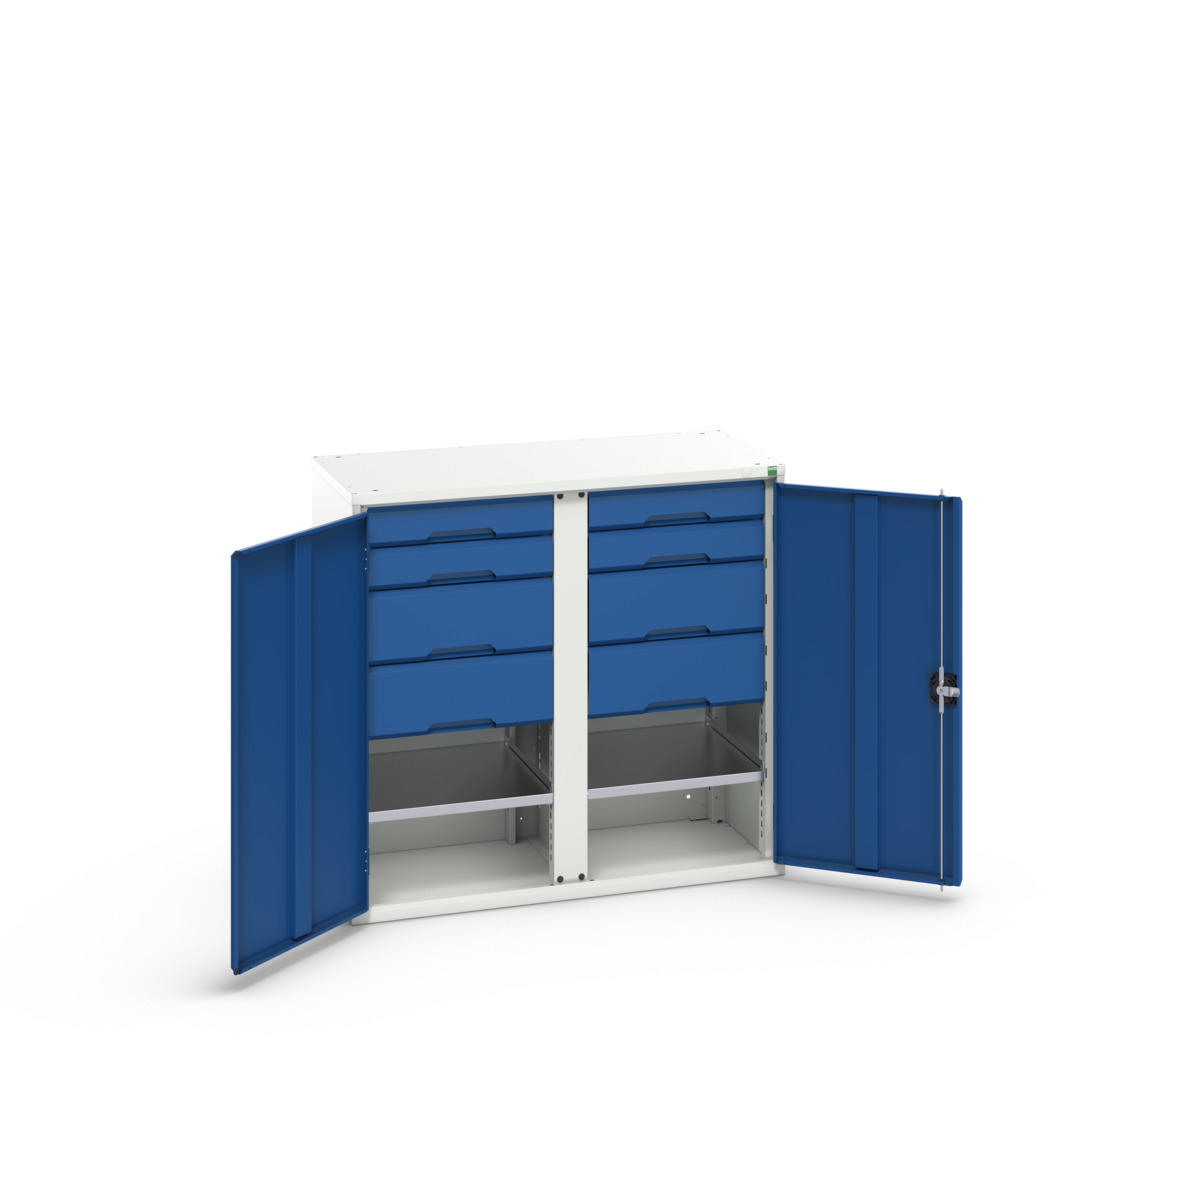 16926557.11 - verso kitted cupboard